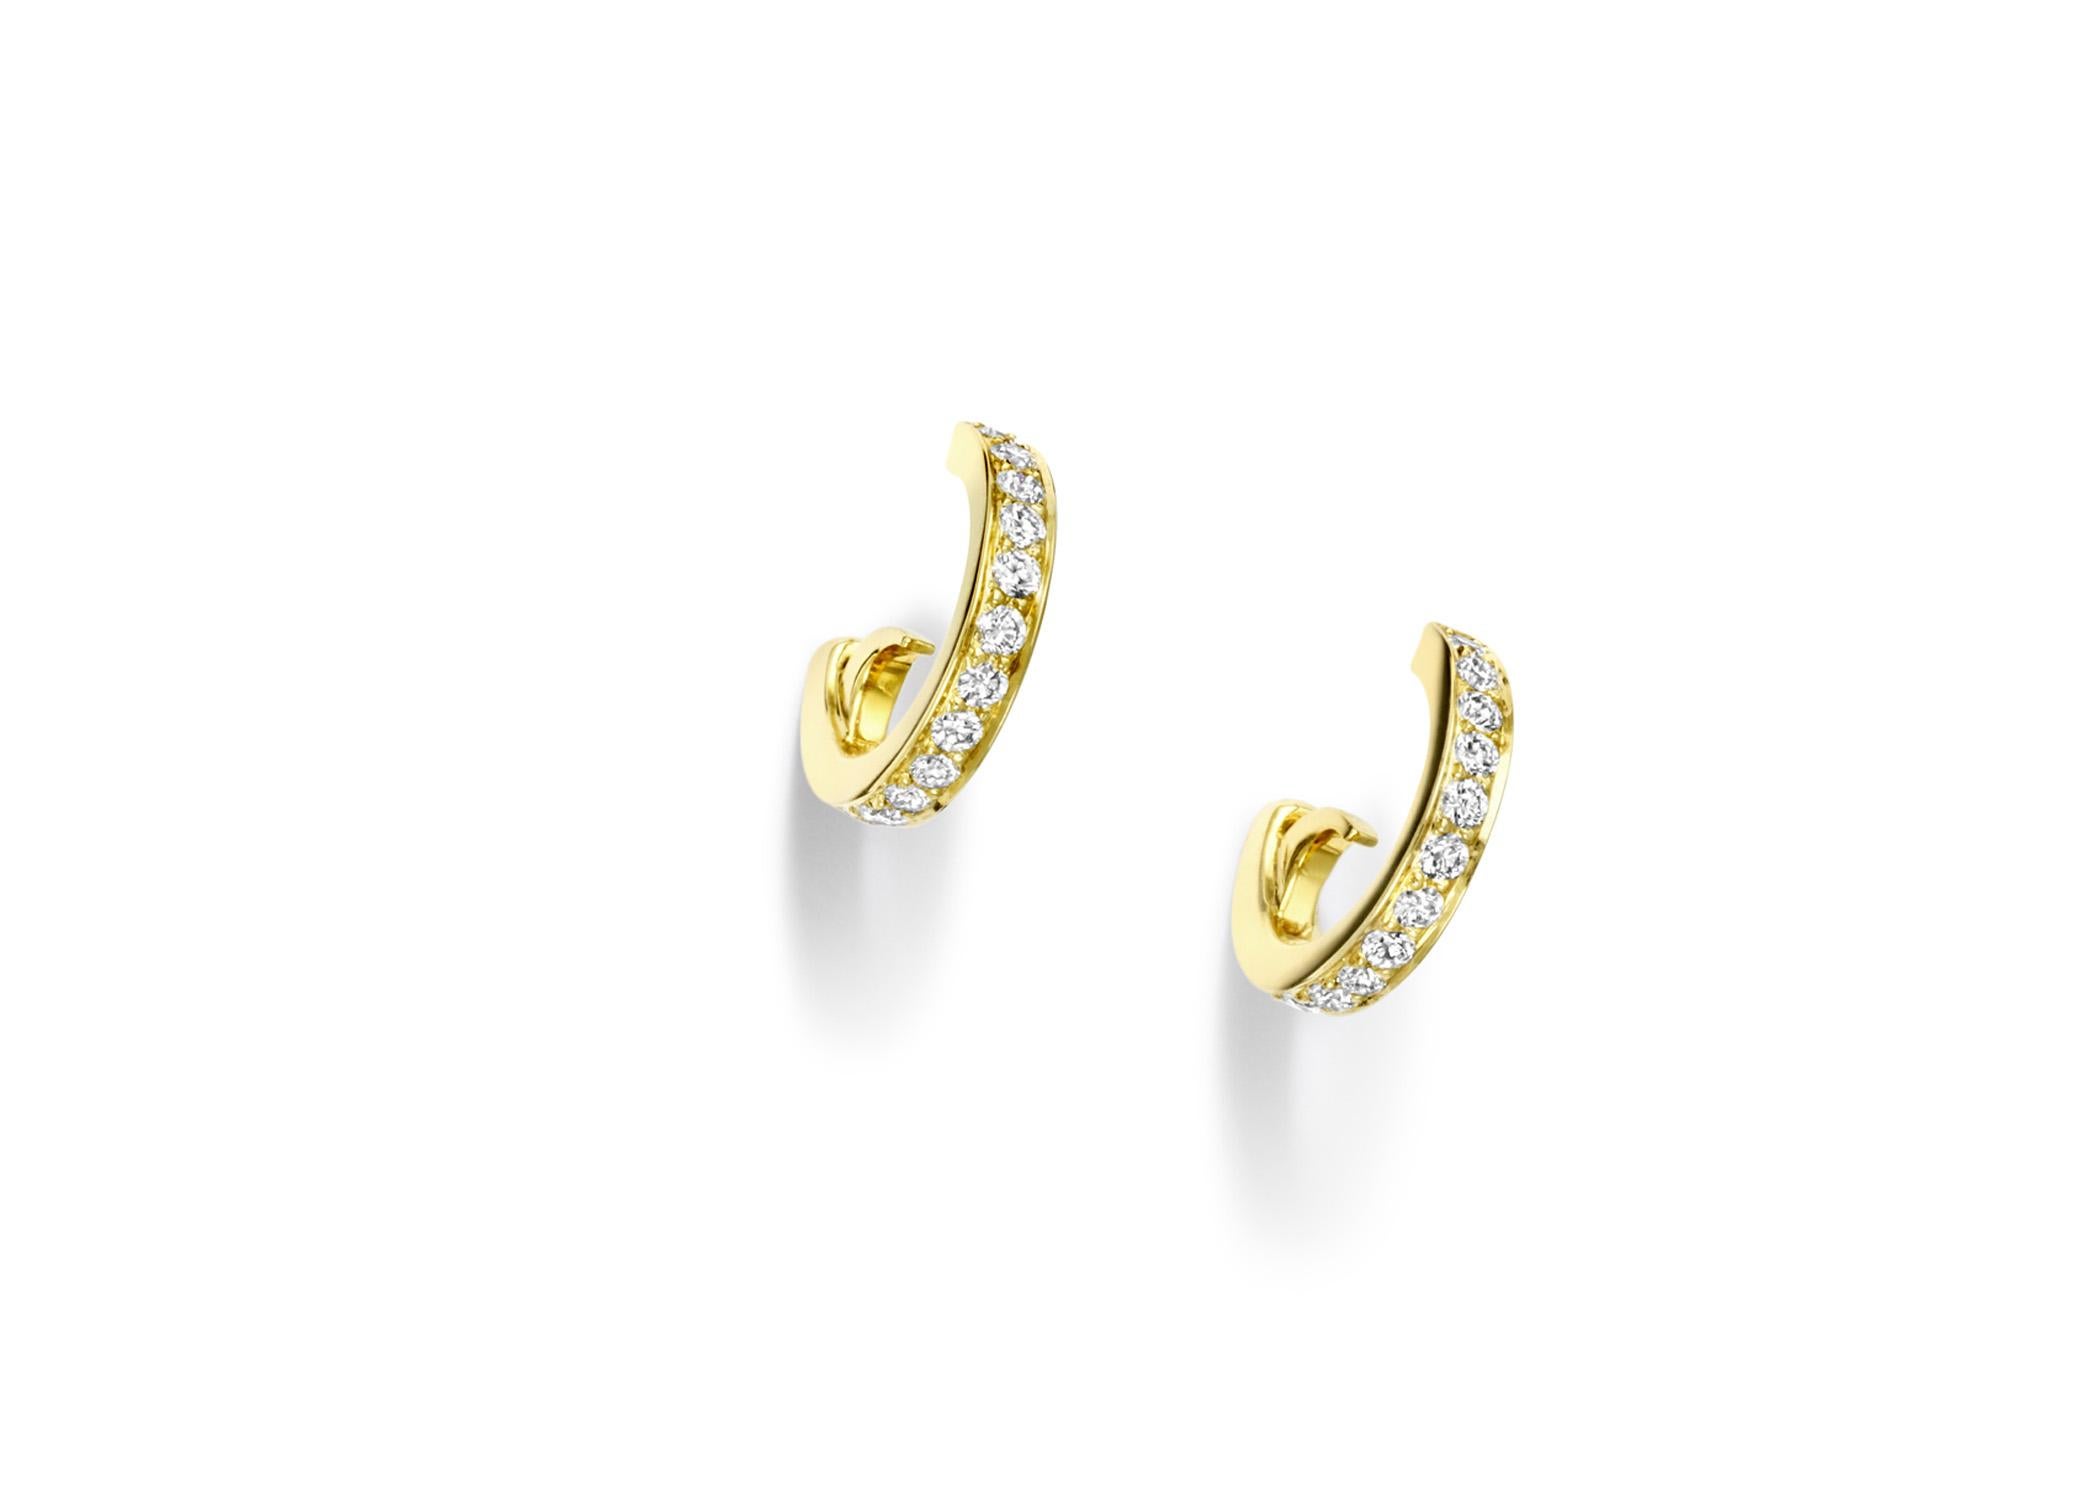 Octavia earrings in 18 karat yellow gold set with diamond pave and very fine drop shape freshwater pearls on diamond pave Astrea hoops.
Each earring, including hoop, measures approximately 36mm in length.

